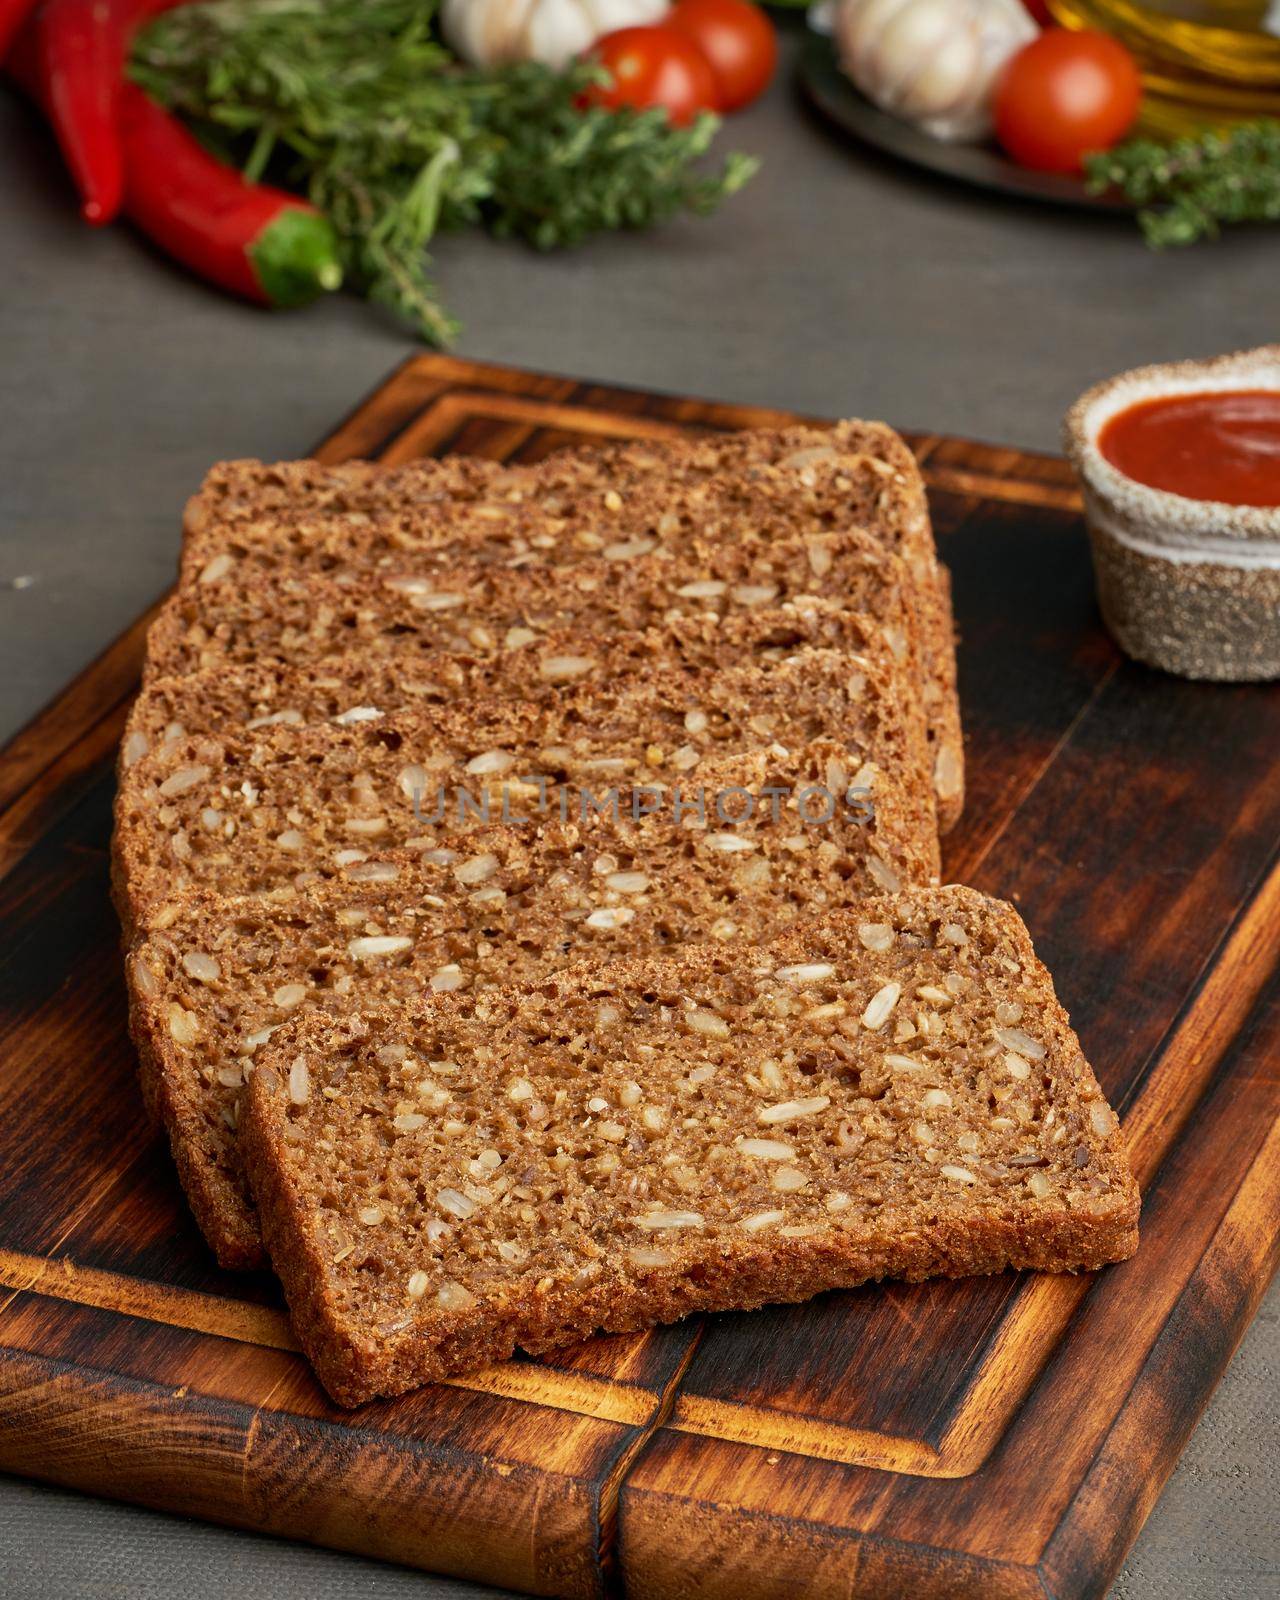 Toasted rye grain bread on a wooden cutting board on dark brown background. Slices of flour pastry with lectins, side view, vertical